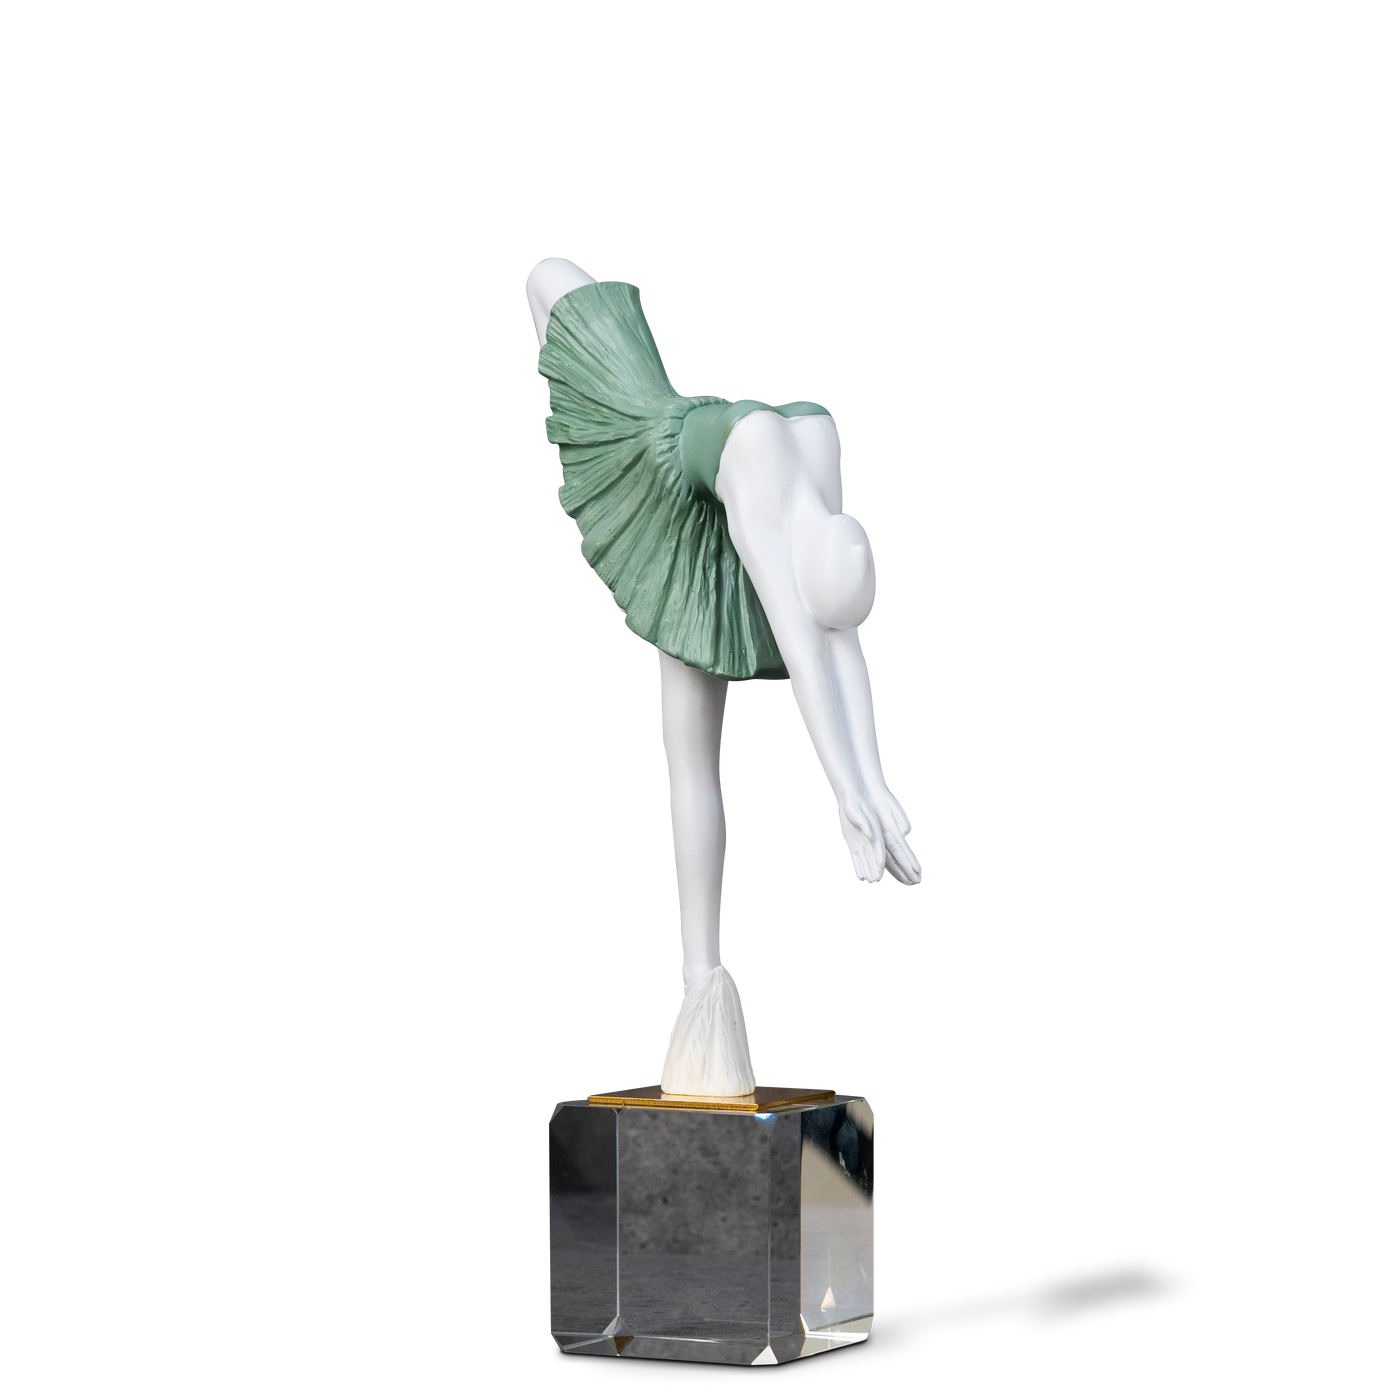 Ballerina statue by Home 360